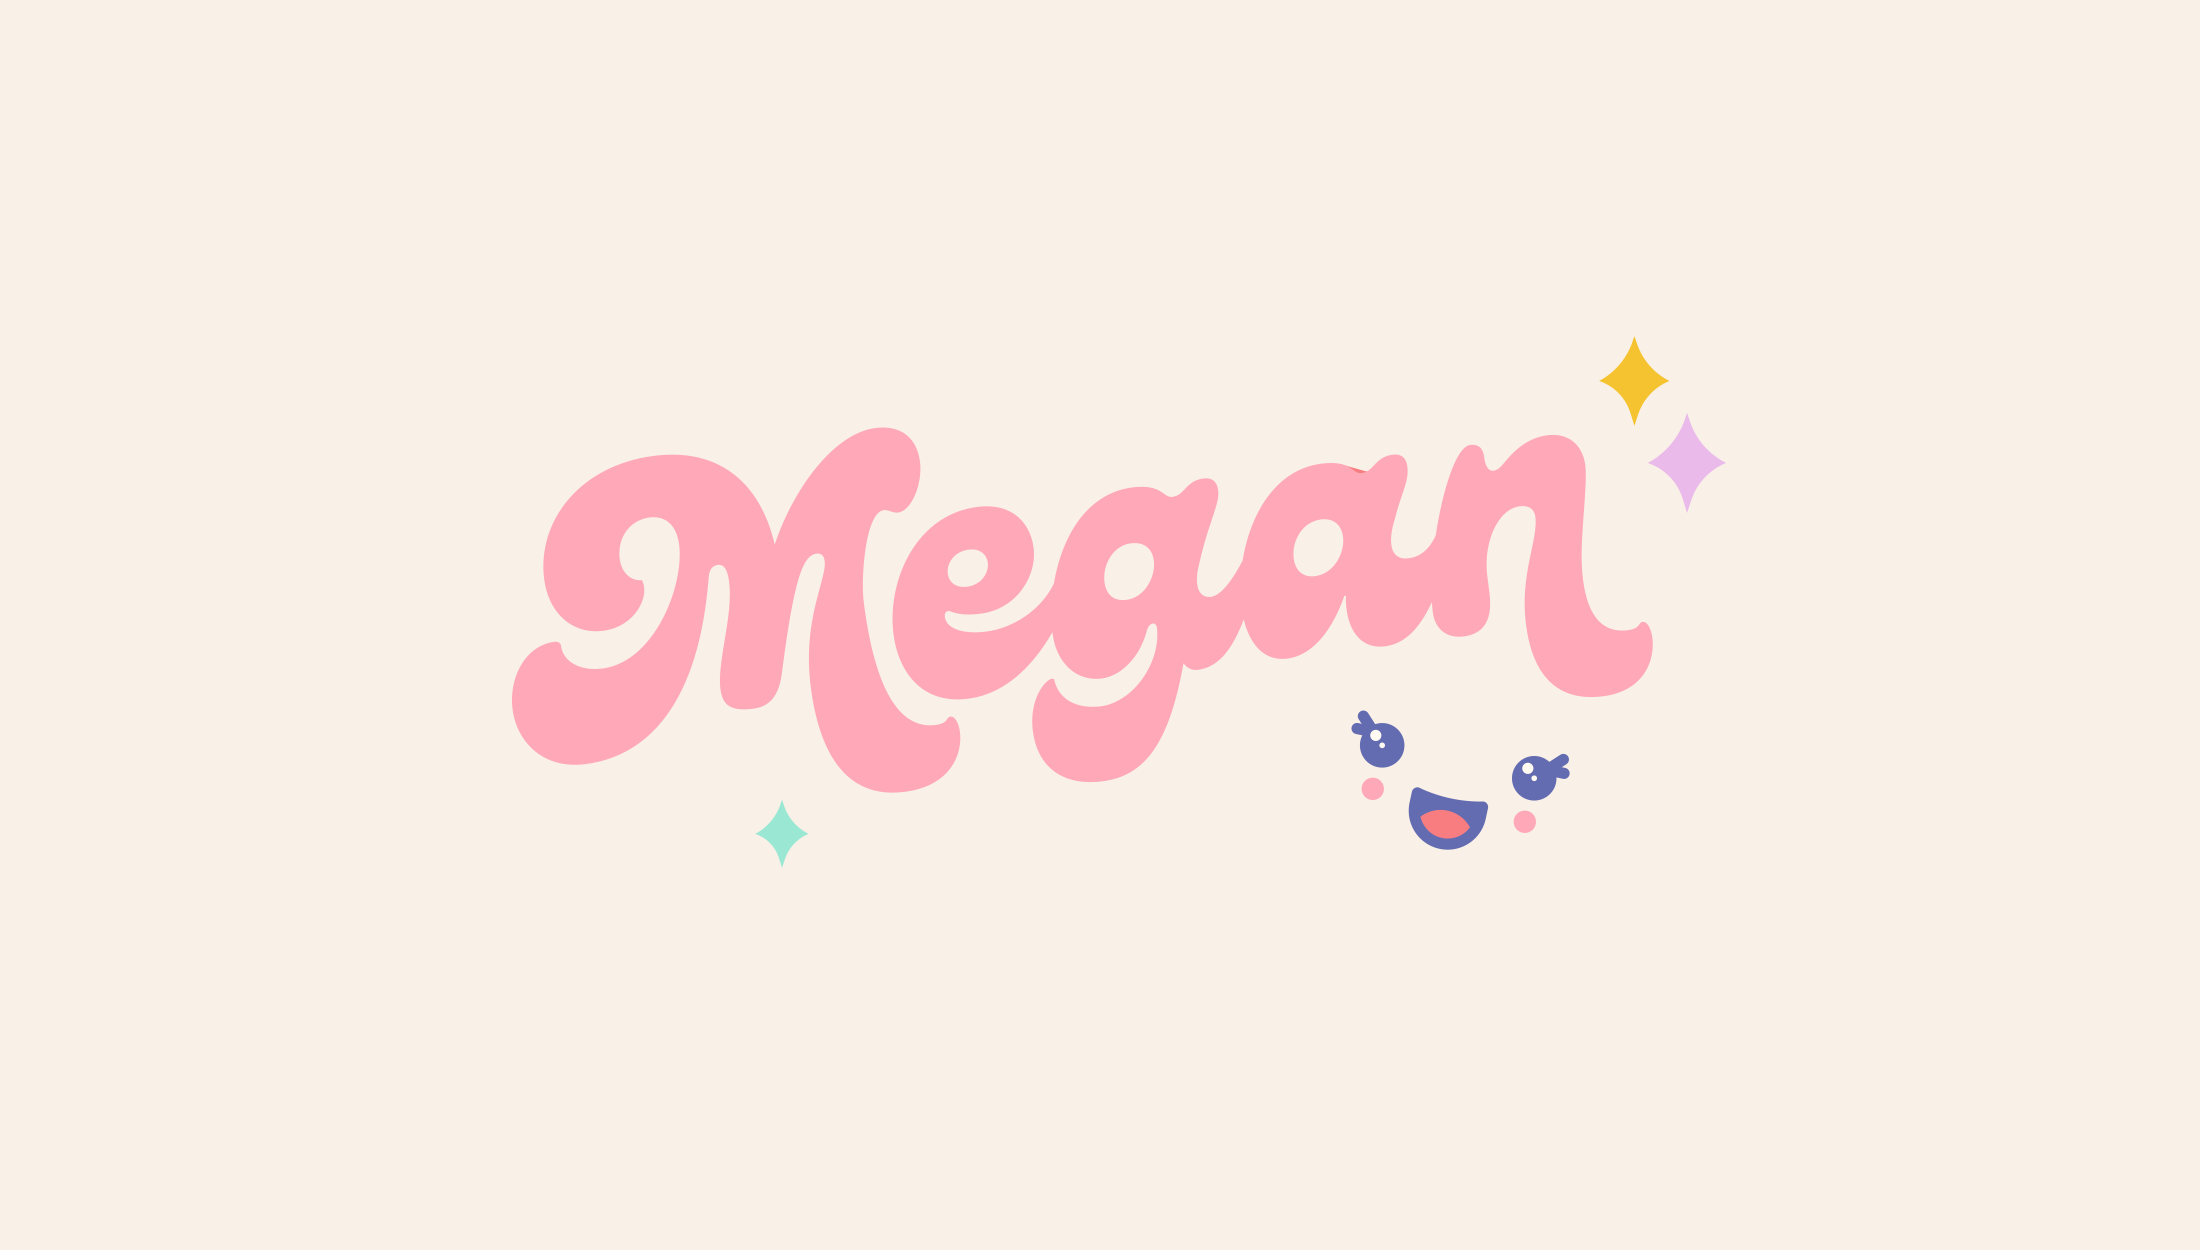 Logo design for MeganPlays, a successful gaming & lifestyle youtuber - designed by Wiltshire-based graphic designer, Kaye Huett